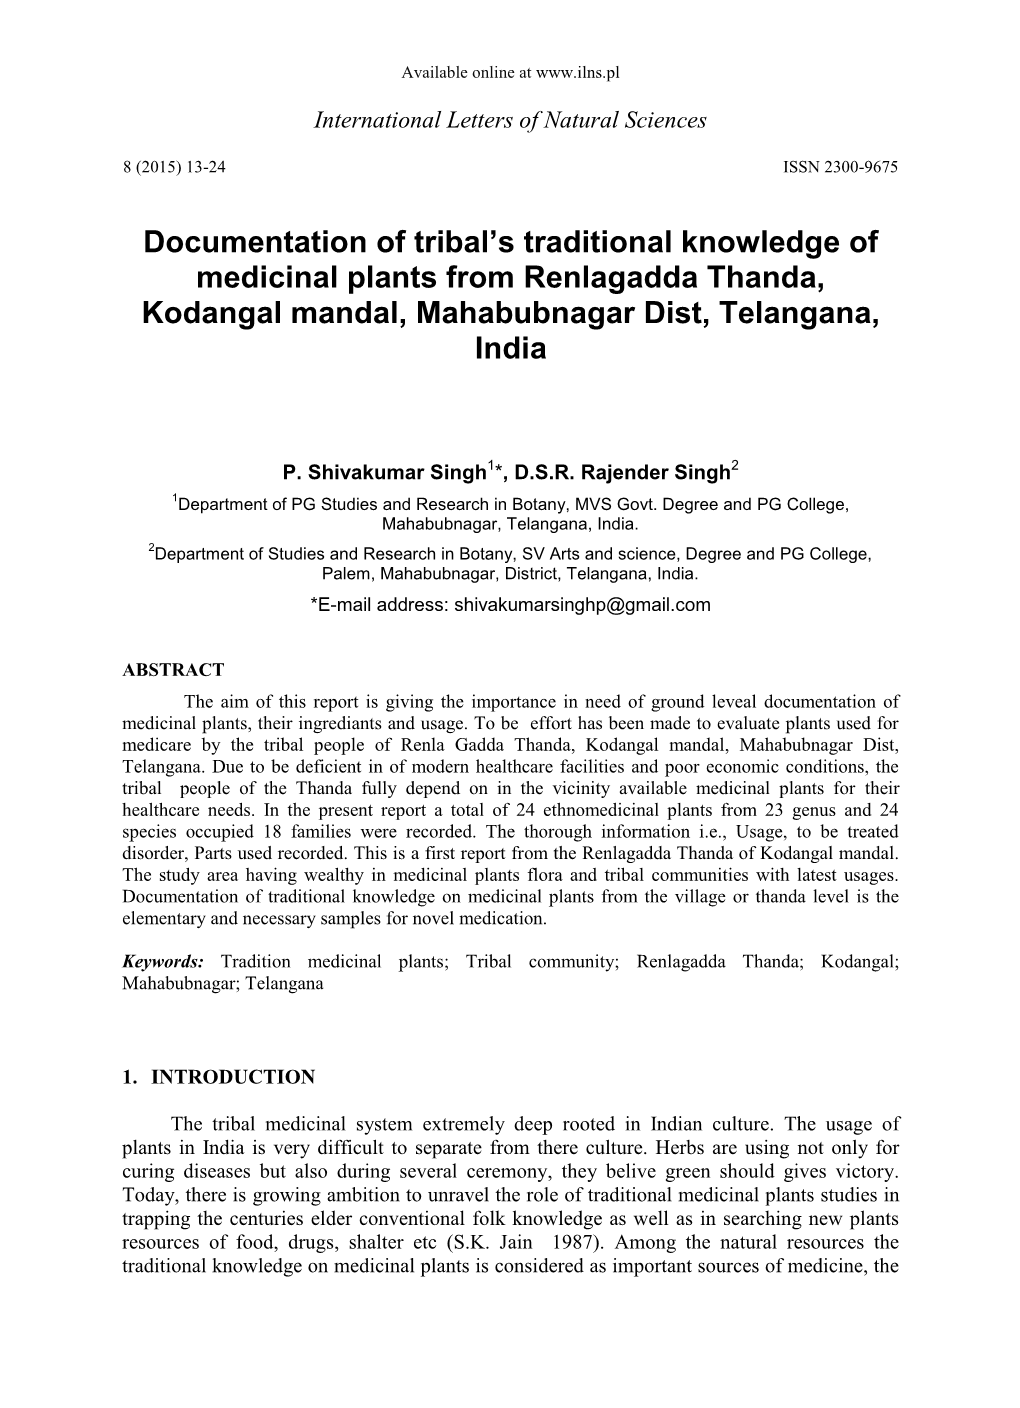 Documentation of Tribal's Traditional Knowledge of Medicinal Plants From